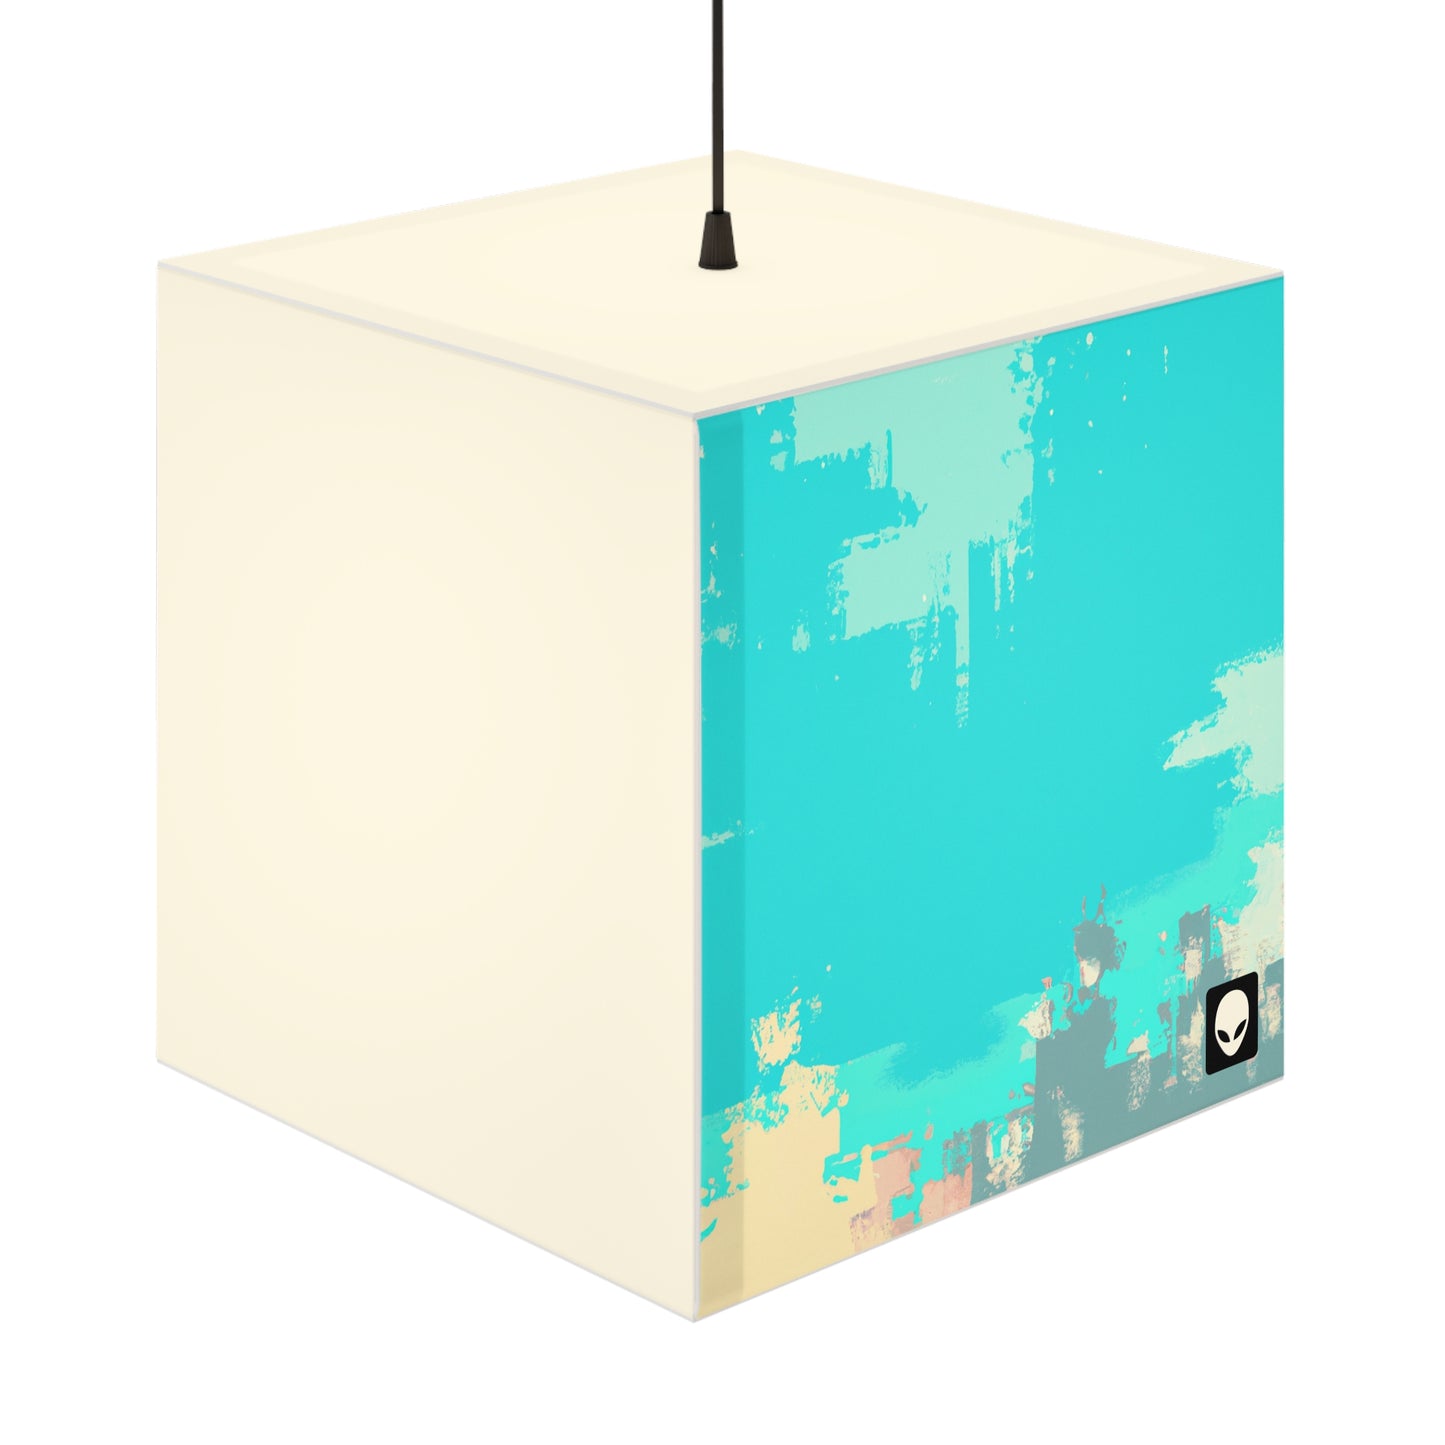 "A Breezy Skyscape: A Combination of Tradition and Modernity" - The Alien Light Cube Lamp